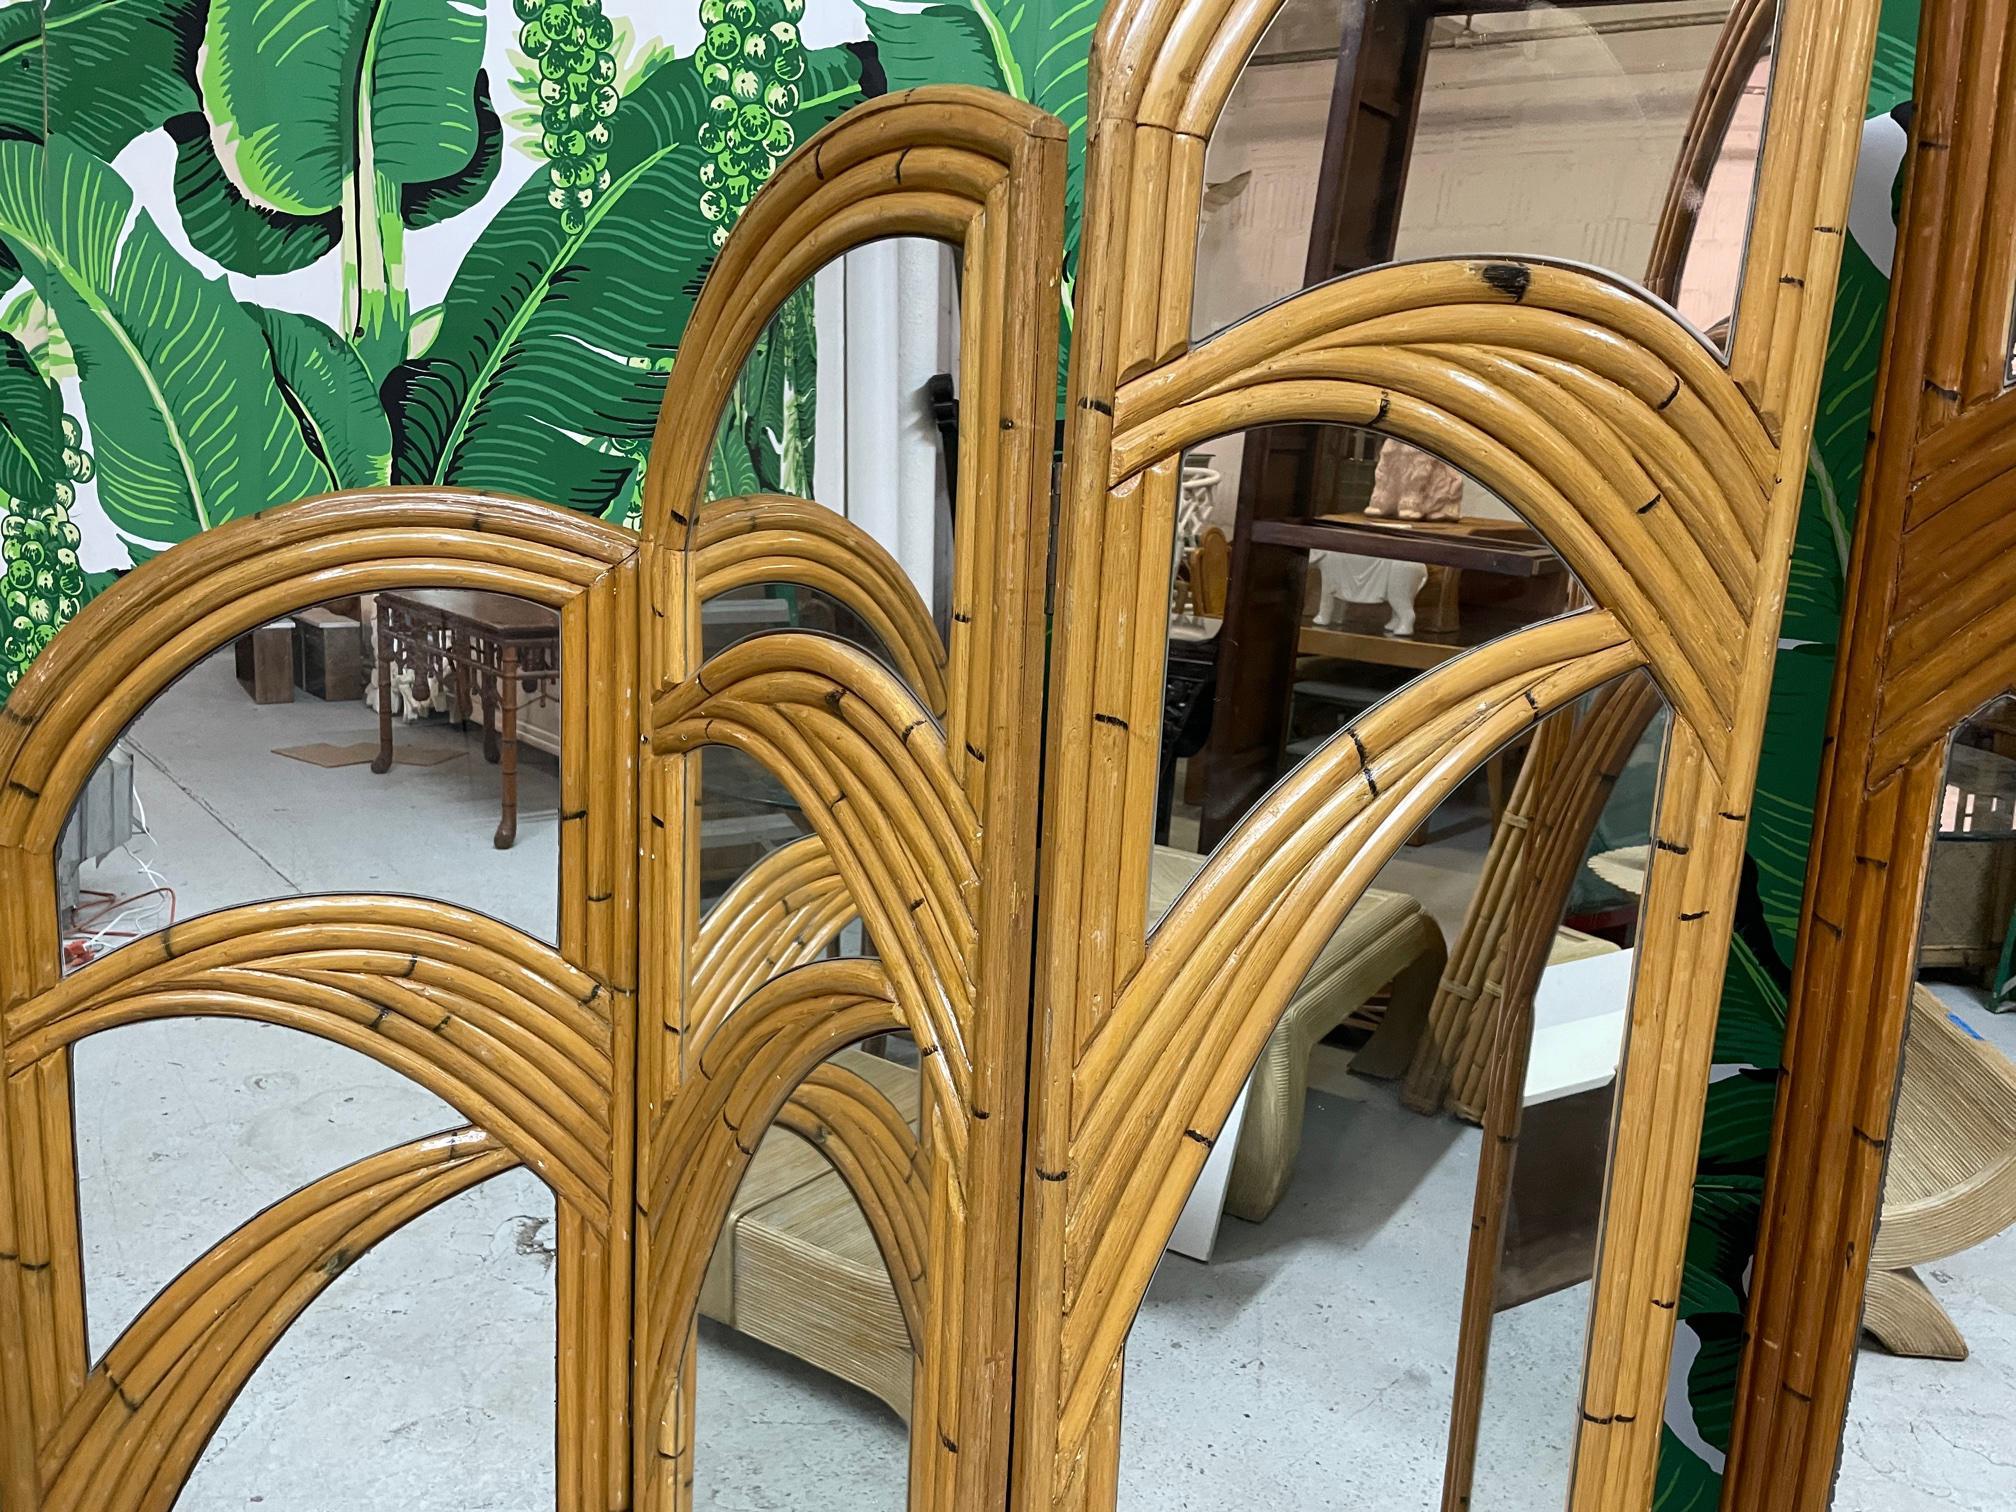 Pair of 3-panel room divider screens feature veneer of pencil reed rattan in a palm tree motif. Very good vintage condition with only minor imperfections consistent with age. Left screen is slightly lighter in color than right screen. Each panel